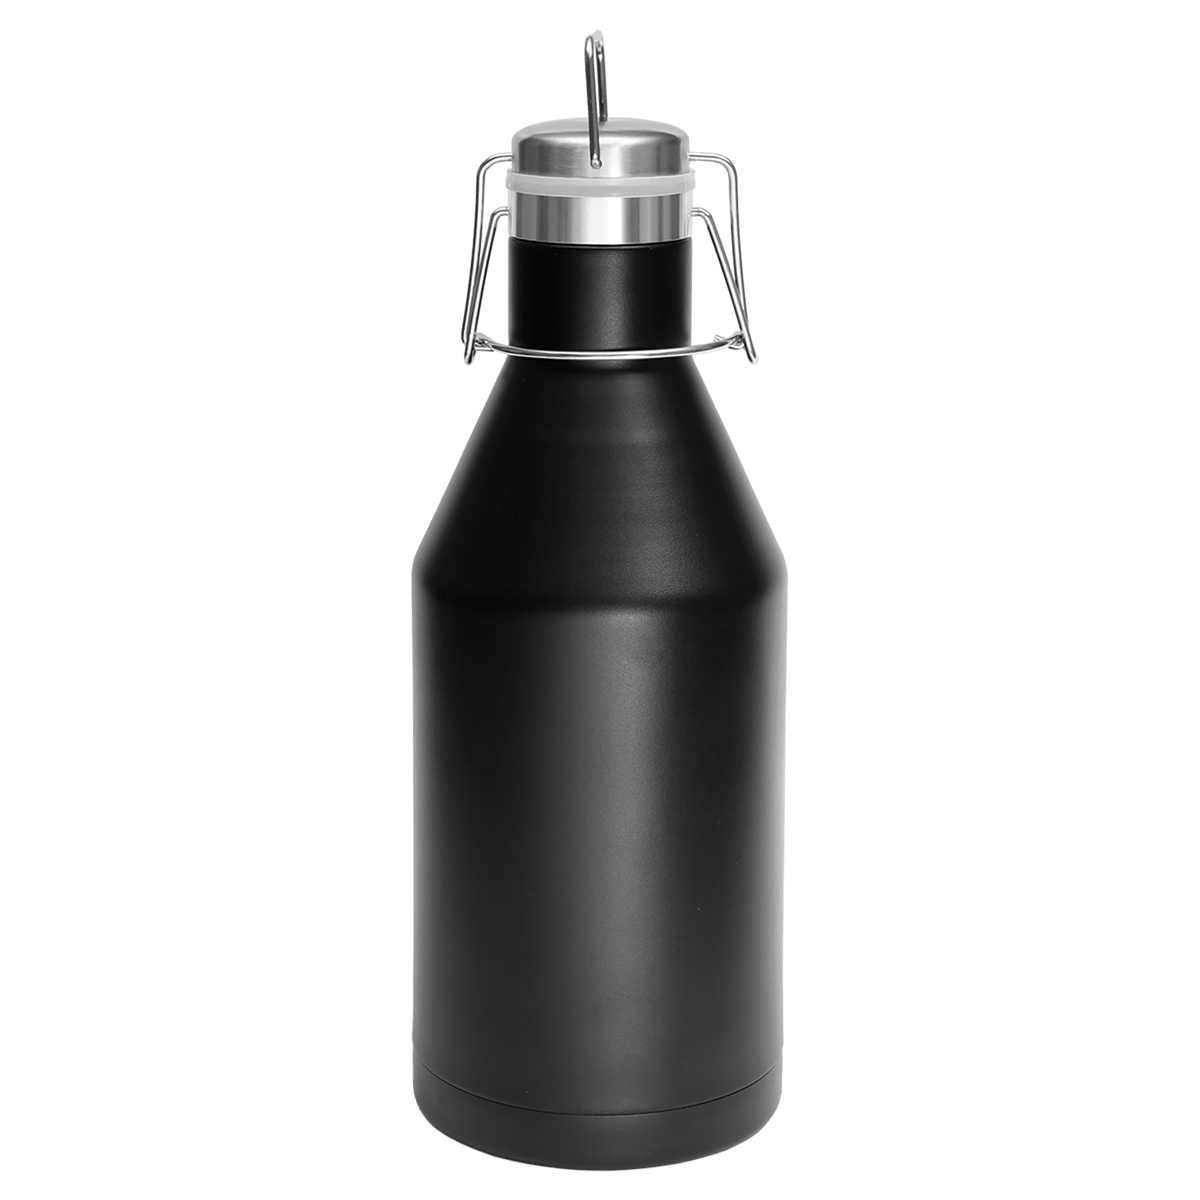 64 oz. Polar Camel Vacuum Insulated Growler with Swing-Top Lid Black